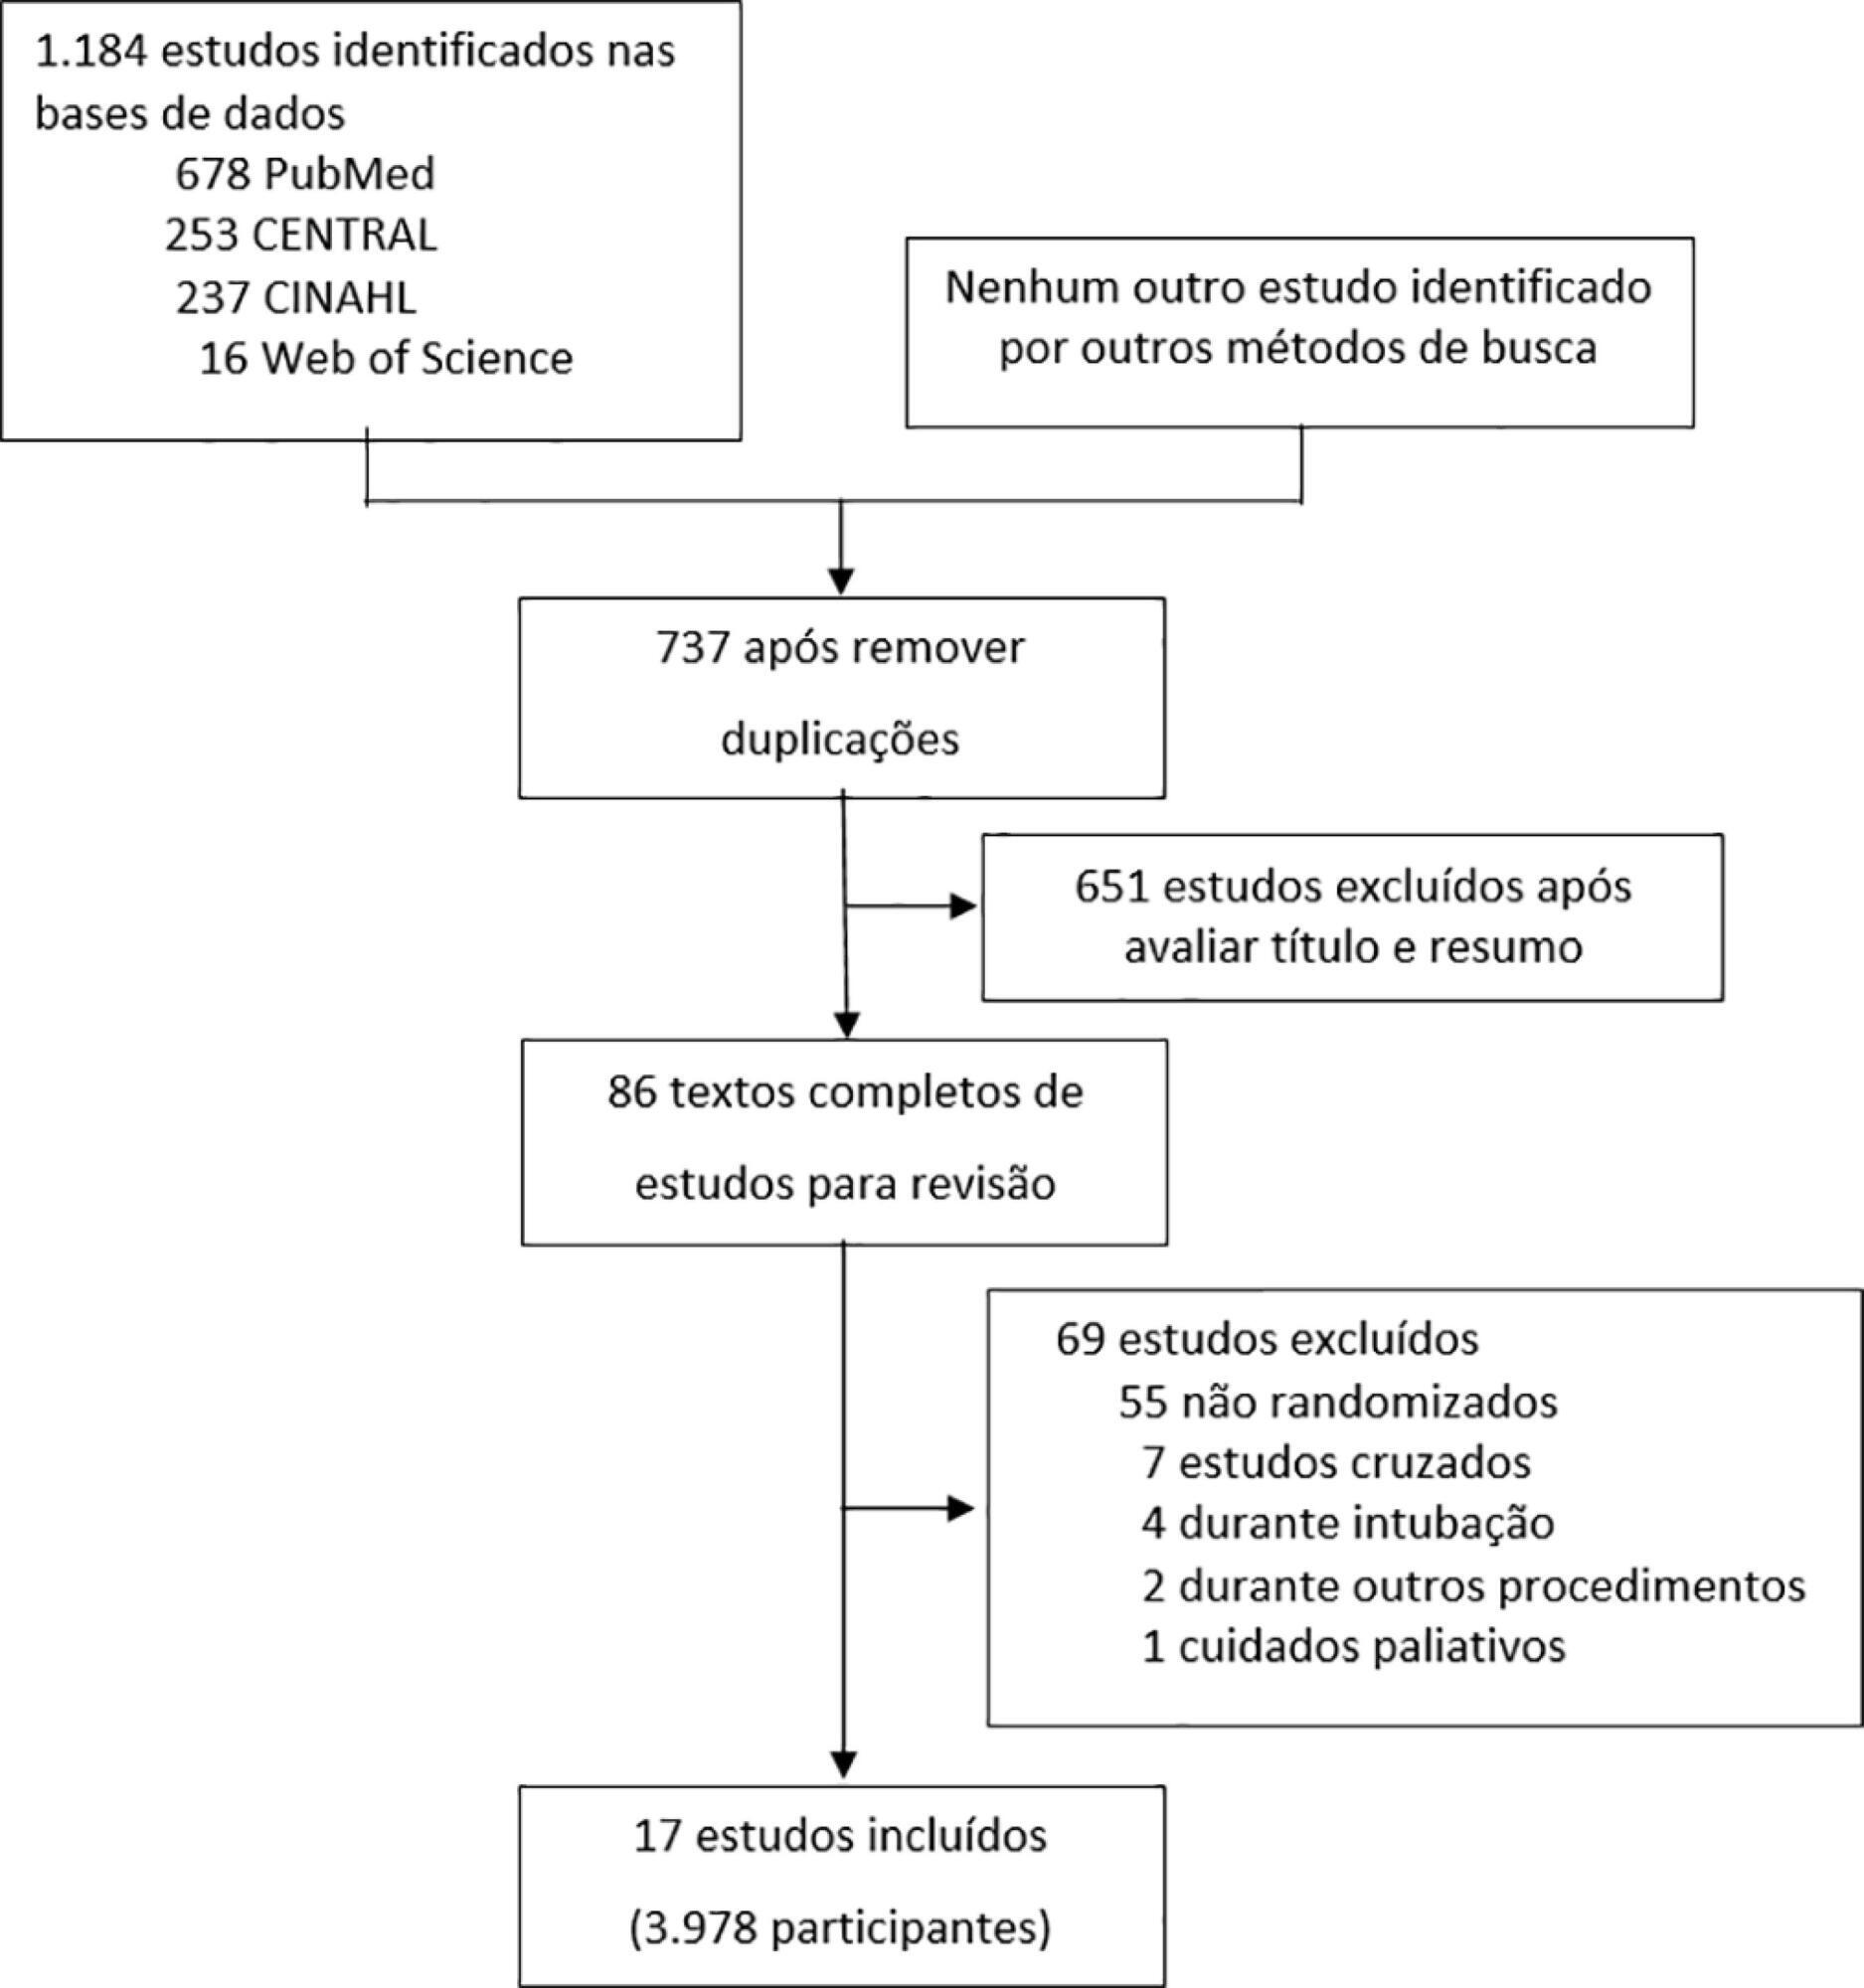 The effects of high-flow nasal cannula on intubation and re-intubation in critically ill patients: a systematic review, meta-analysis and trial sequential analysis